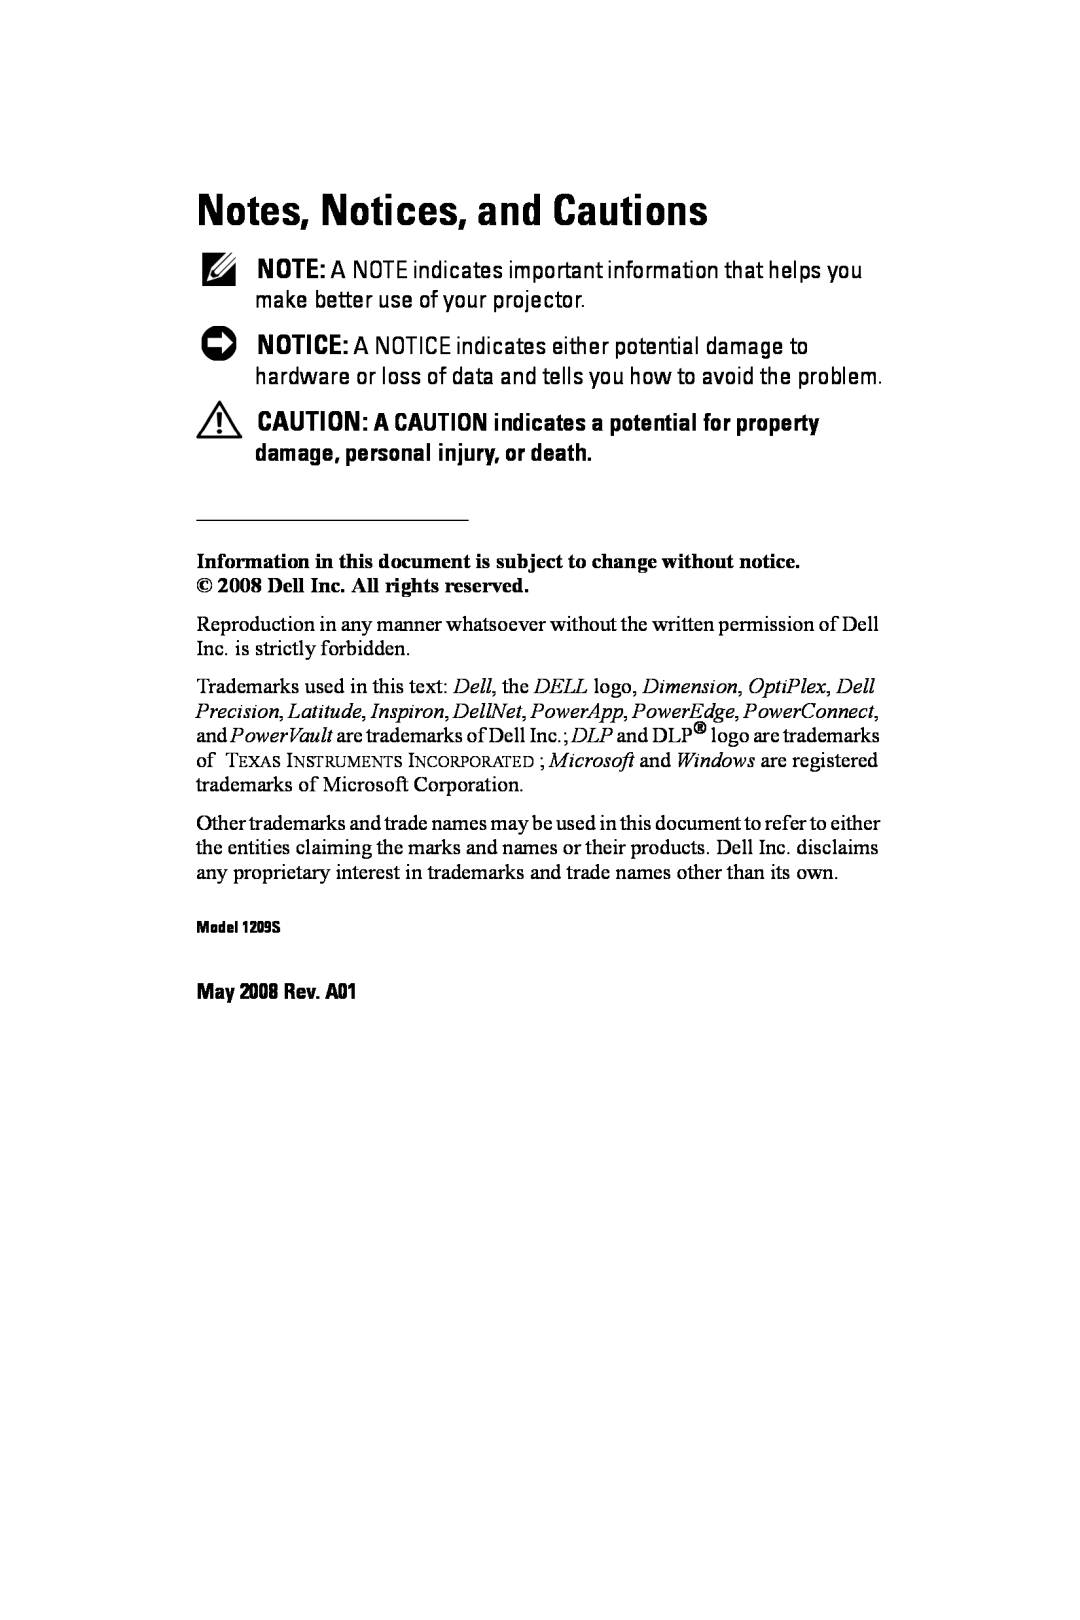 Dell 1209S manual Notes, Notices, and Cautions, ____________________, May 2008 Rev. A01 